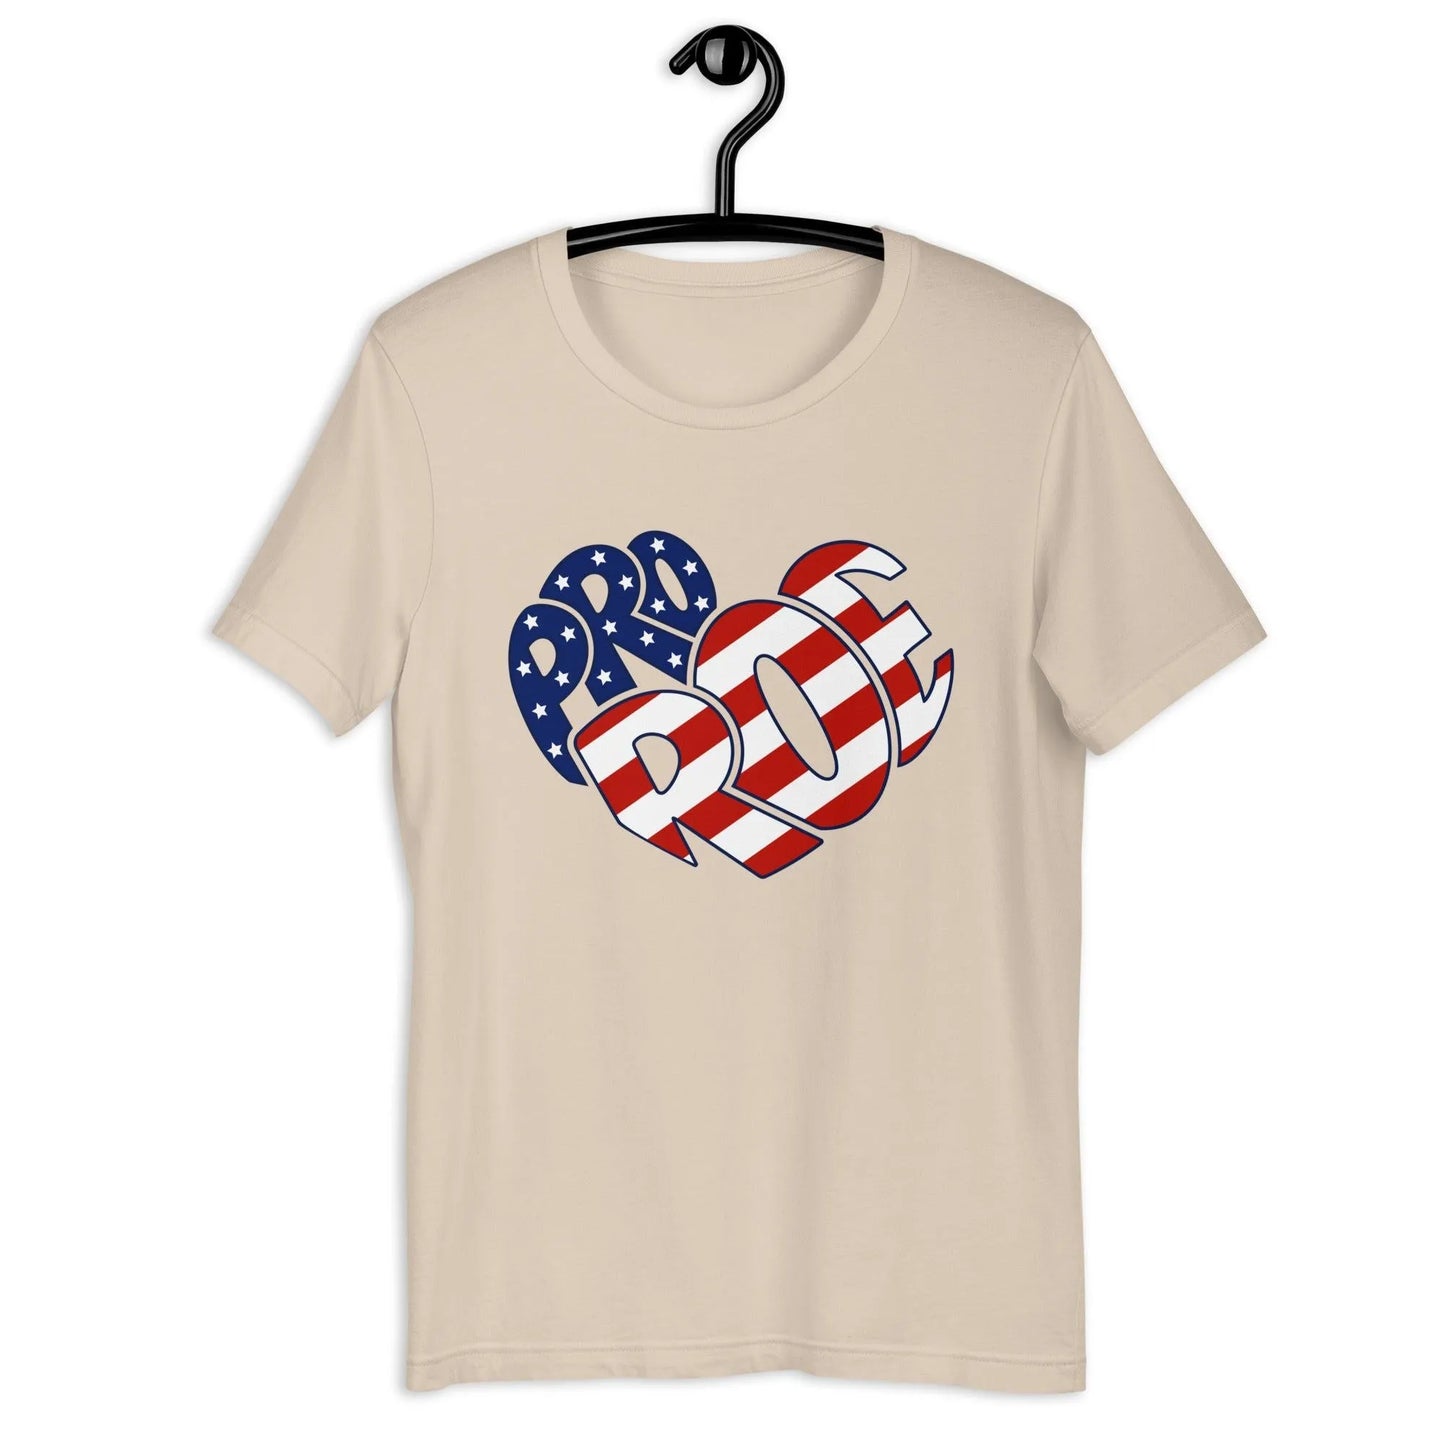 Pro Roe Abortion Rights unisex USA stars and striped t-shirt Rebel Girl Rampage